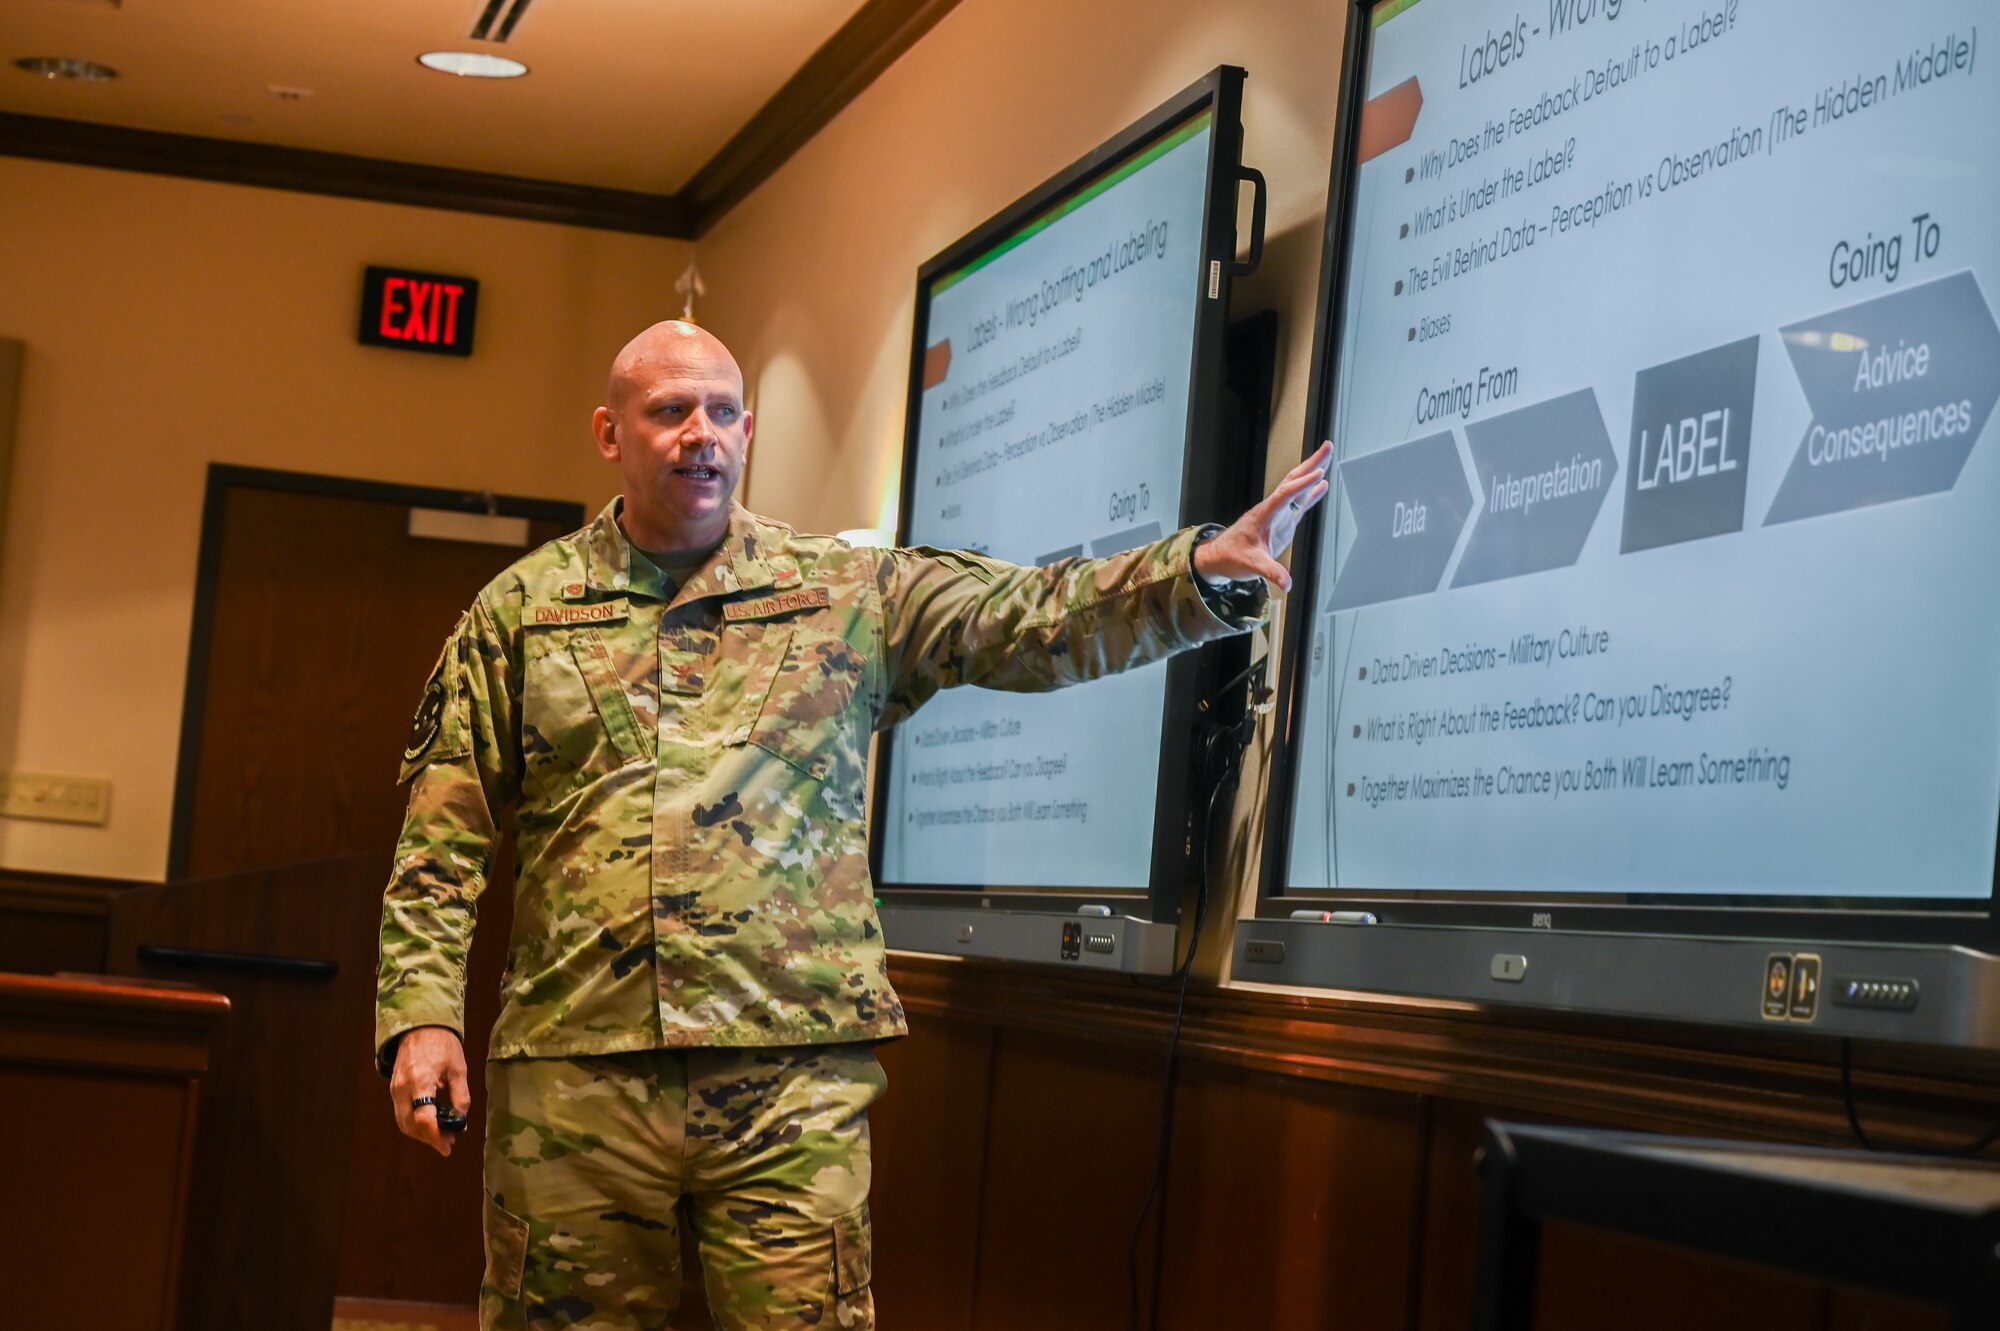 U.S. Air Force Col. Davidson, 47th Flying Training Wing commander, explains a PowerPoint presentation to his team during a professional development discussion at Laughlin Air Force Base, Texas, on March 22, 2023. The discussion focused on the importance of feedback and developing leaders within the Air Force. (U.S. Air Force photo by Airman 1st Class Keira Rossman)